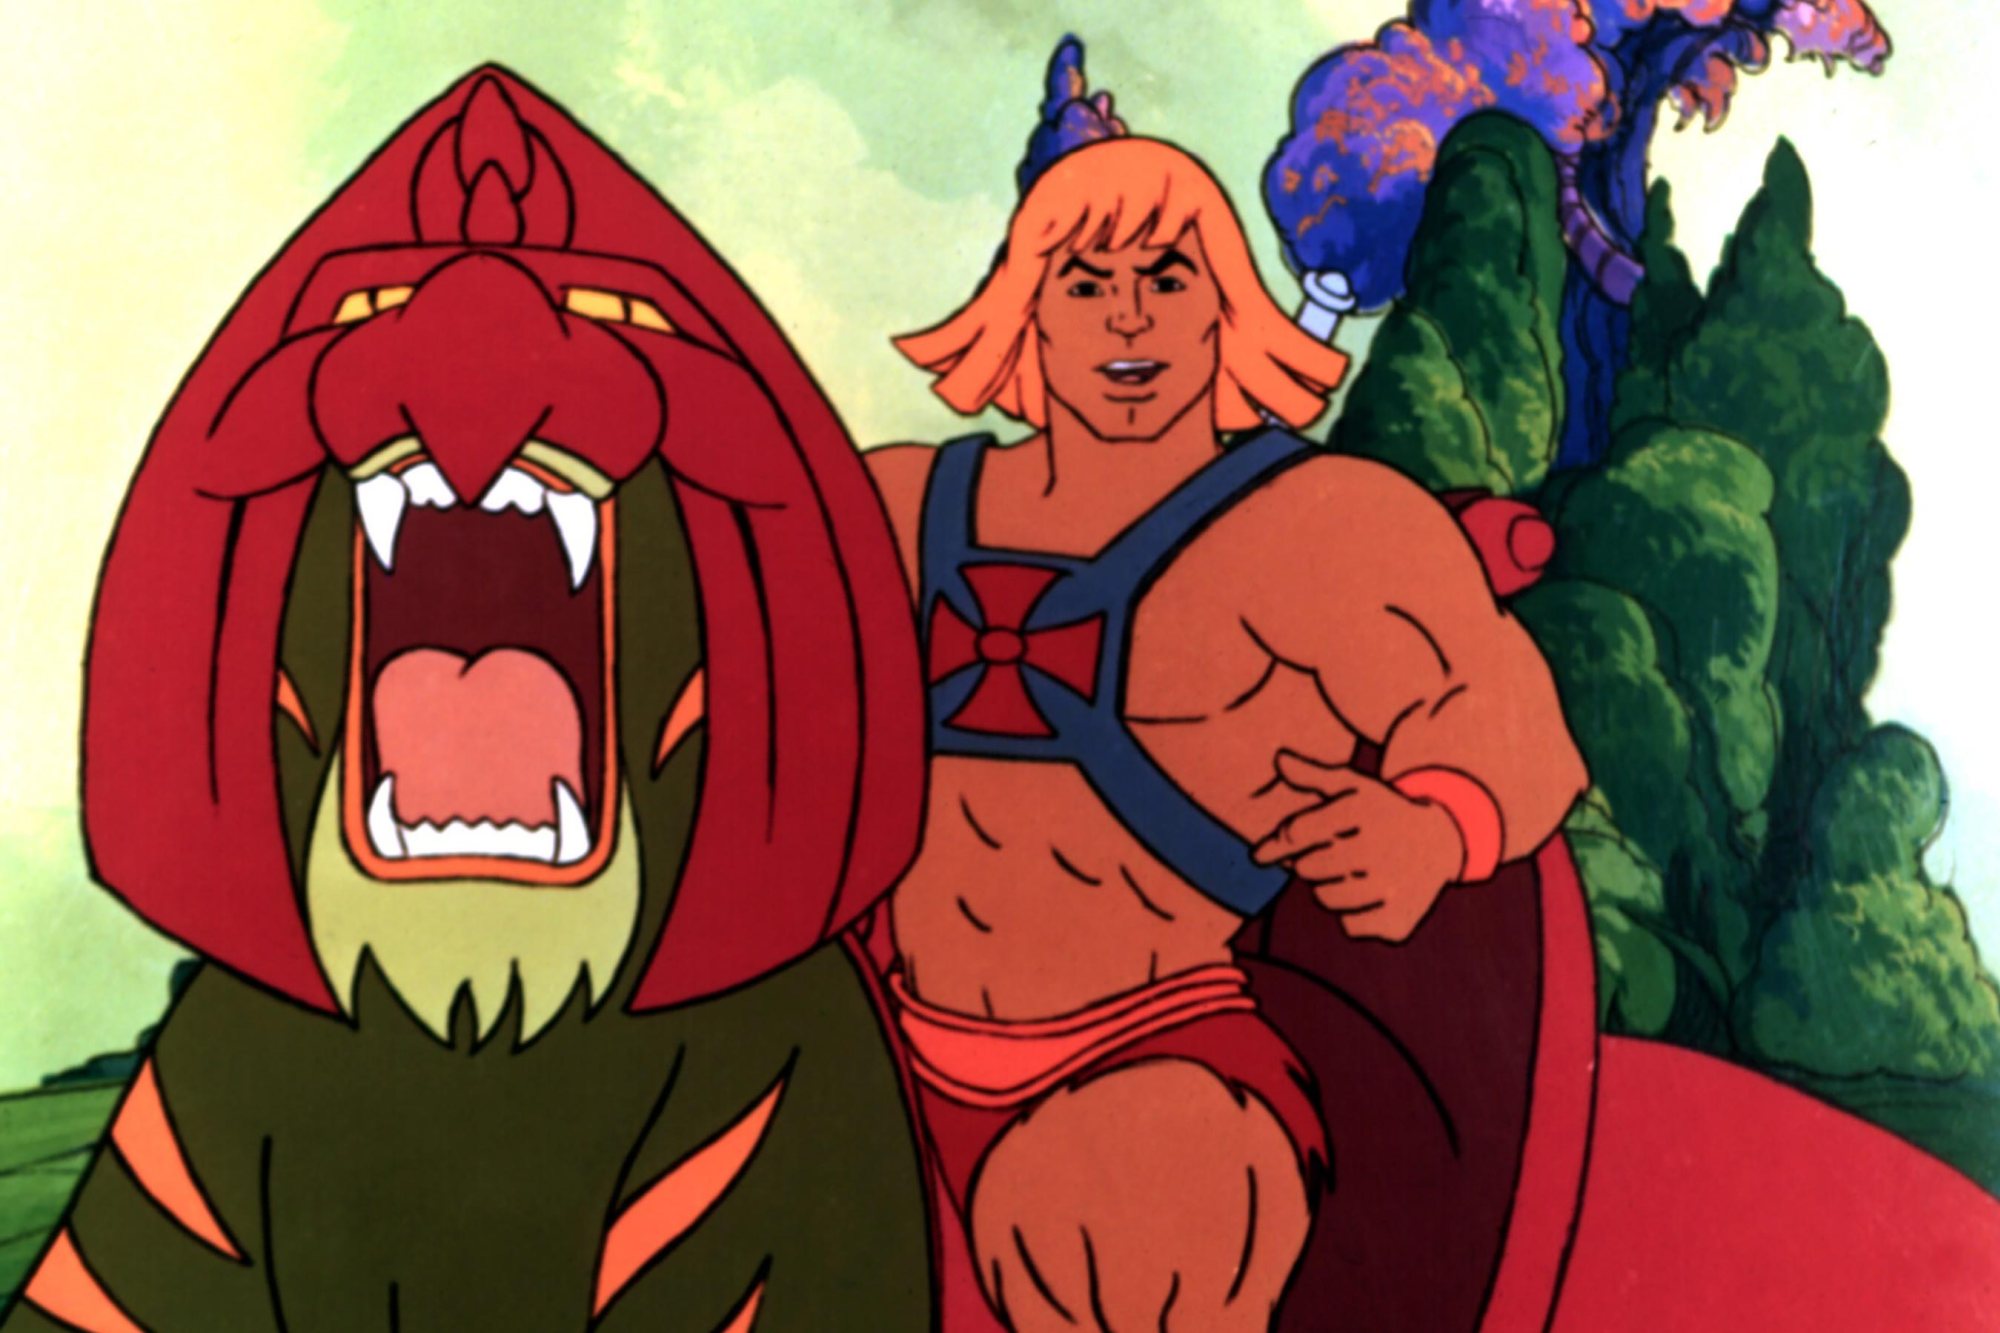 Пел мен. Хи Мэн. Генерал Дункан химен. He-man and the Masters of the Universe 1983. Химэн 80.